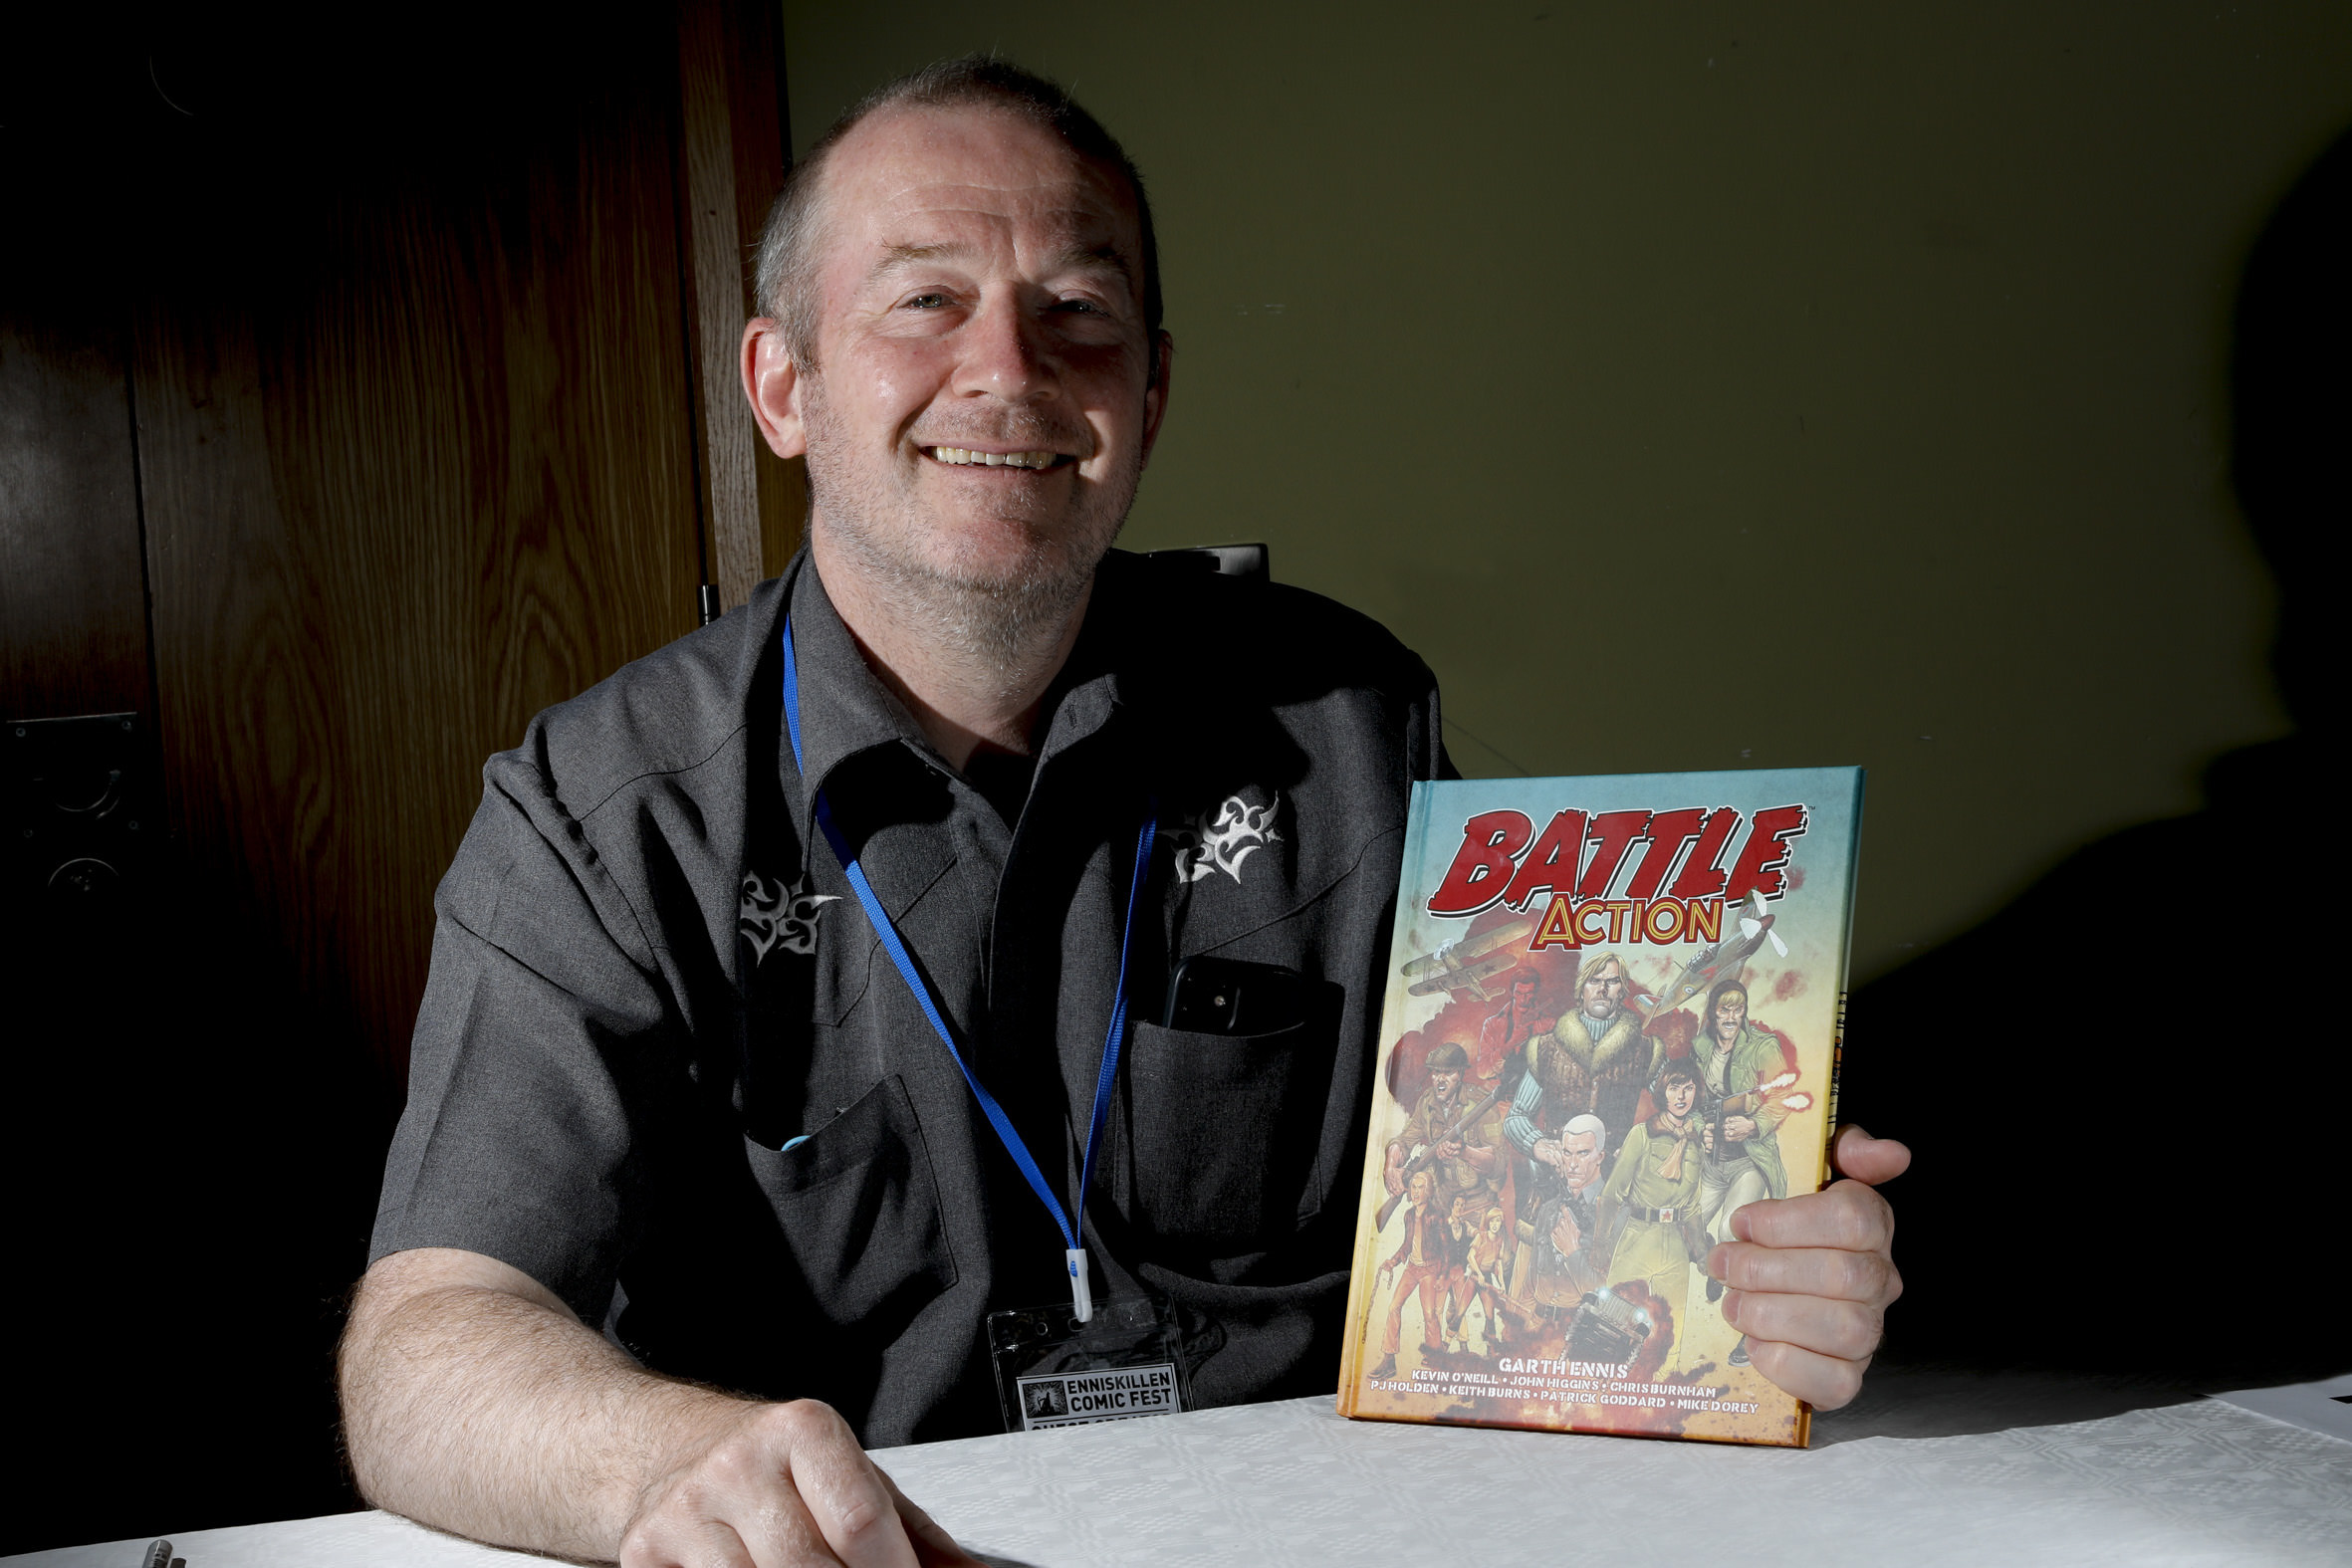 Garth Ennis with his new book, Battle Action.